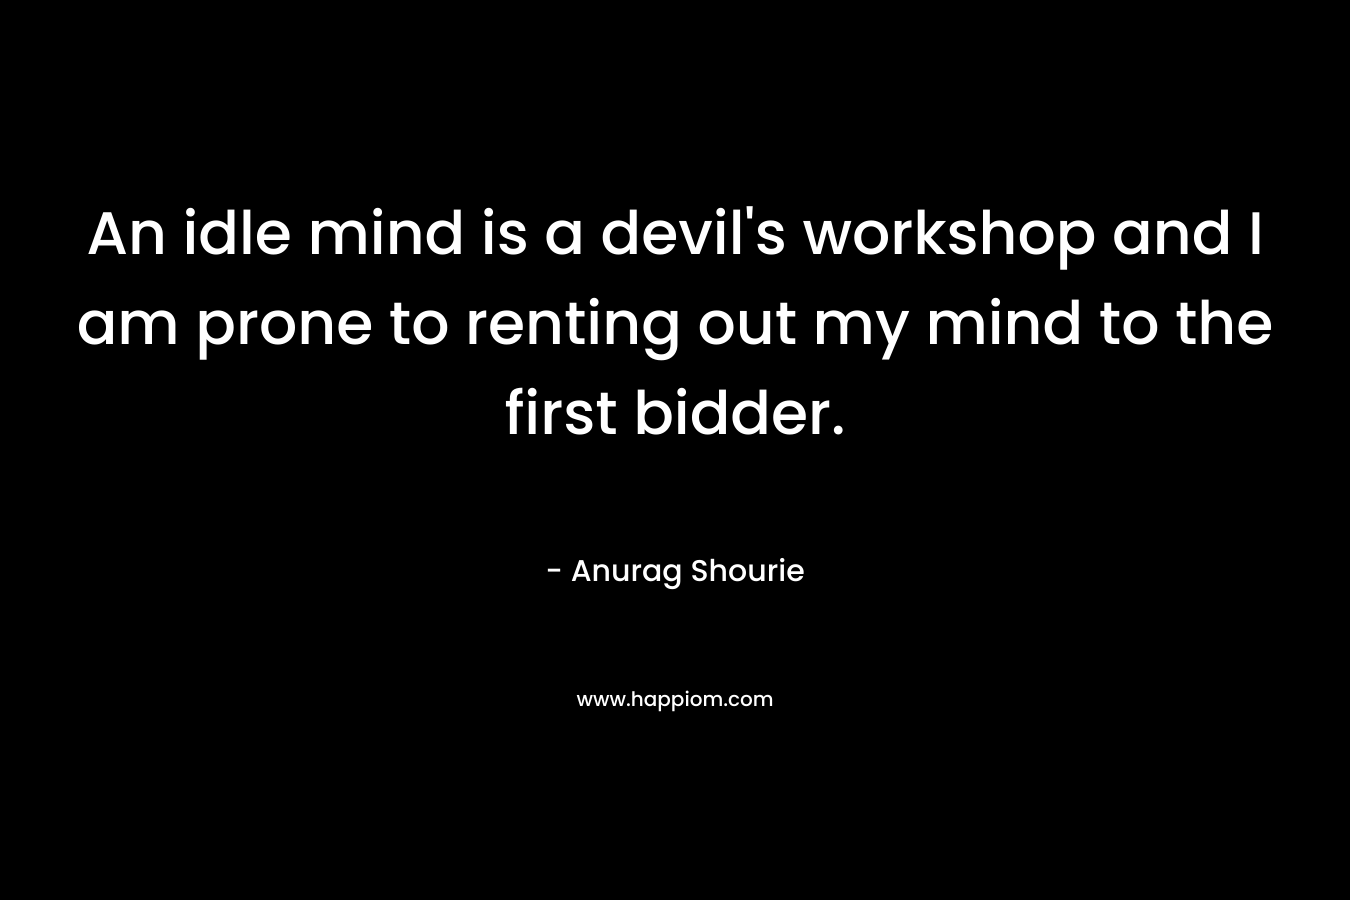 An idle mind is a devil’s workshop and I am prone to renting out my mind to the first bidder. – Anurag Shourie